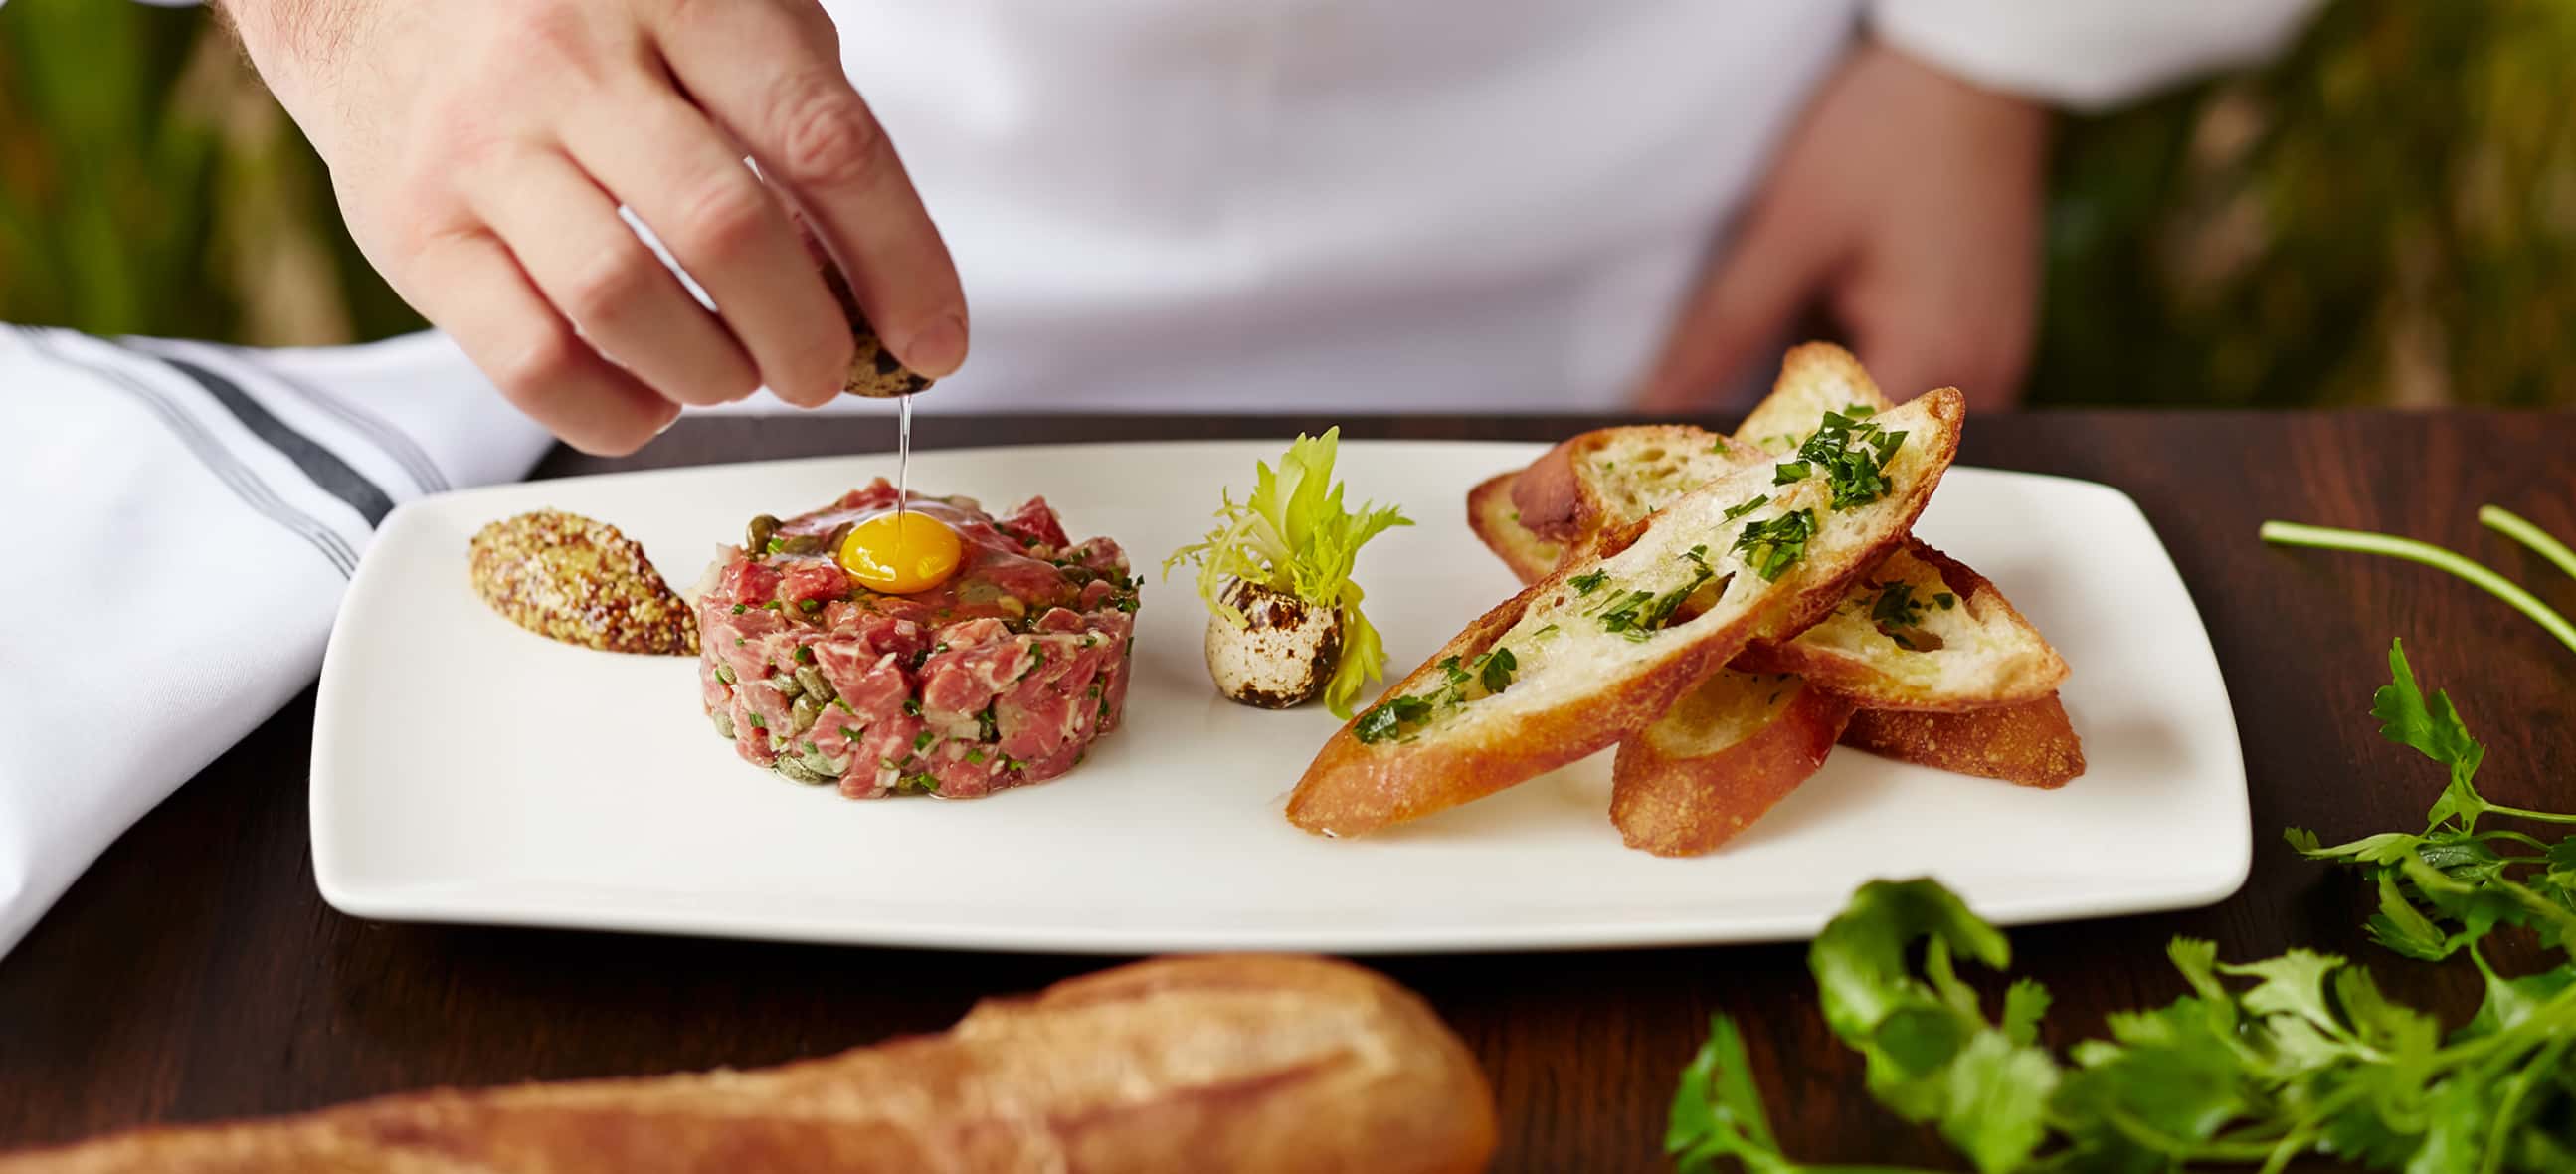 A chef in a white jacket is garnishing a dish of steak tartare with an egg yolk on top, accompanied by toasted bread and a side of seasoning.